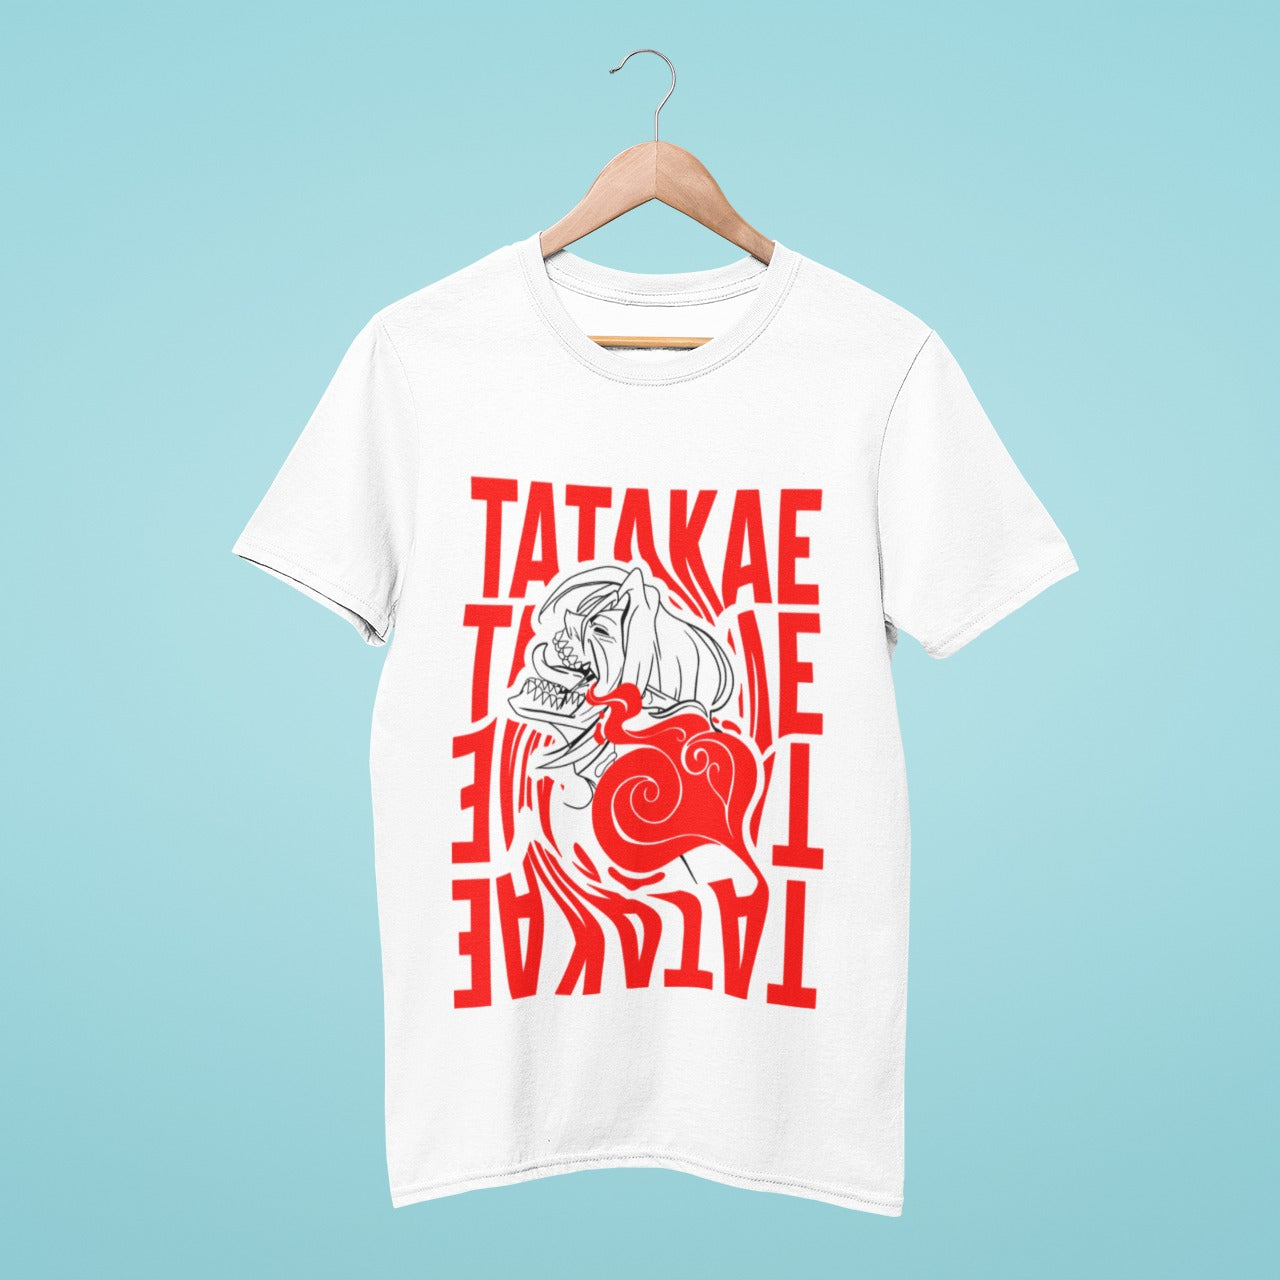 Get ready to show your love for Attack on Titan with our striking white t-shirt. Featuring "Tatakae" written in bold red four times and a circular morph with Eren's giant form face. Made with high-quality materials, this shirt offers both style and comfort. Make a bold statement with your fashion choices and grab yours today.